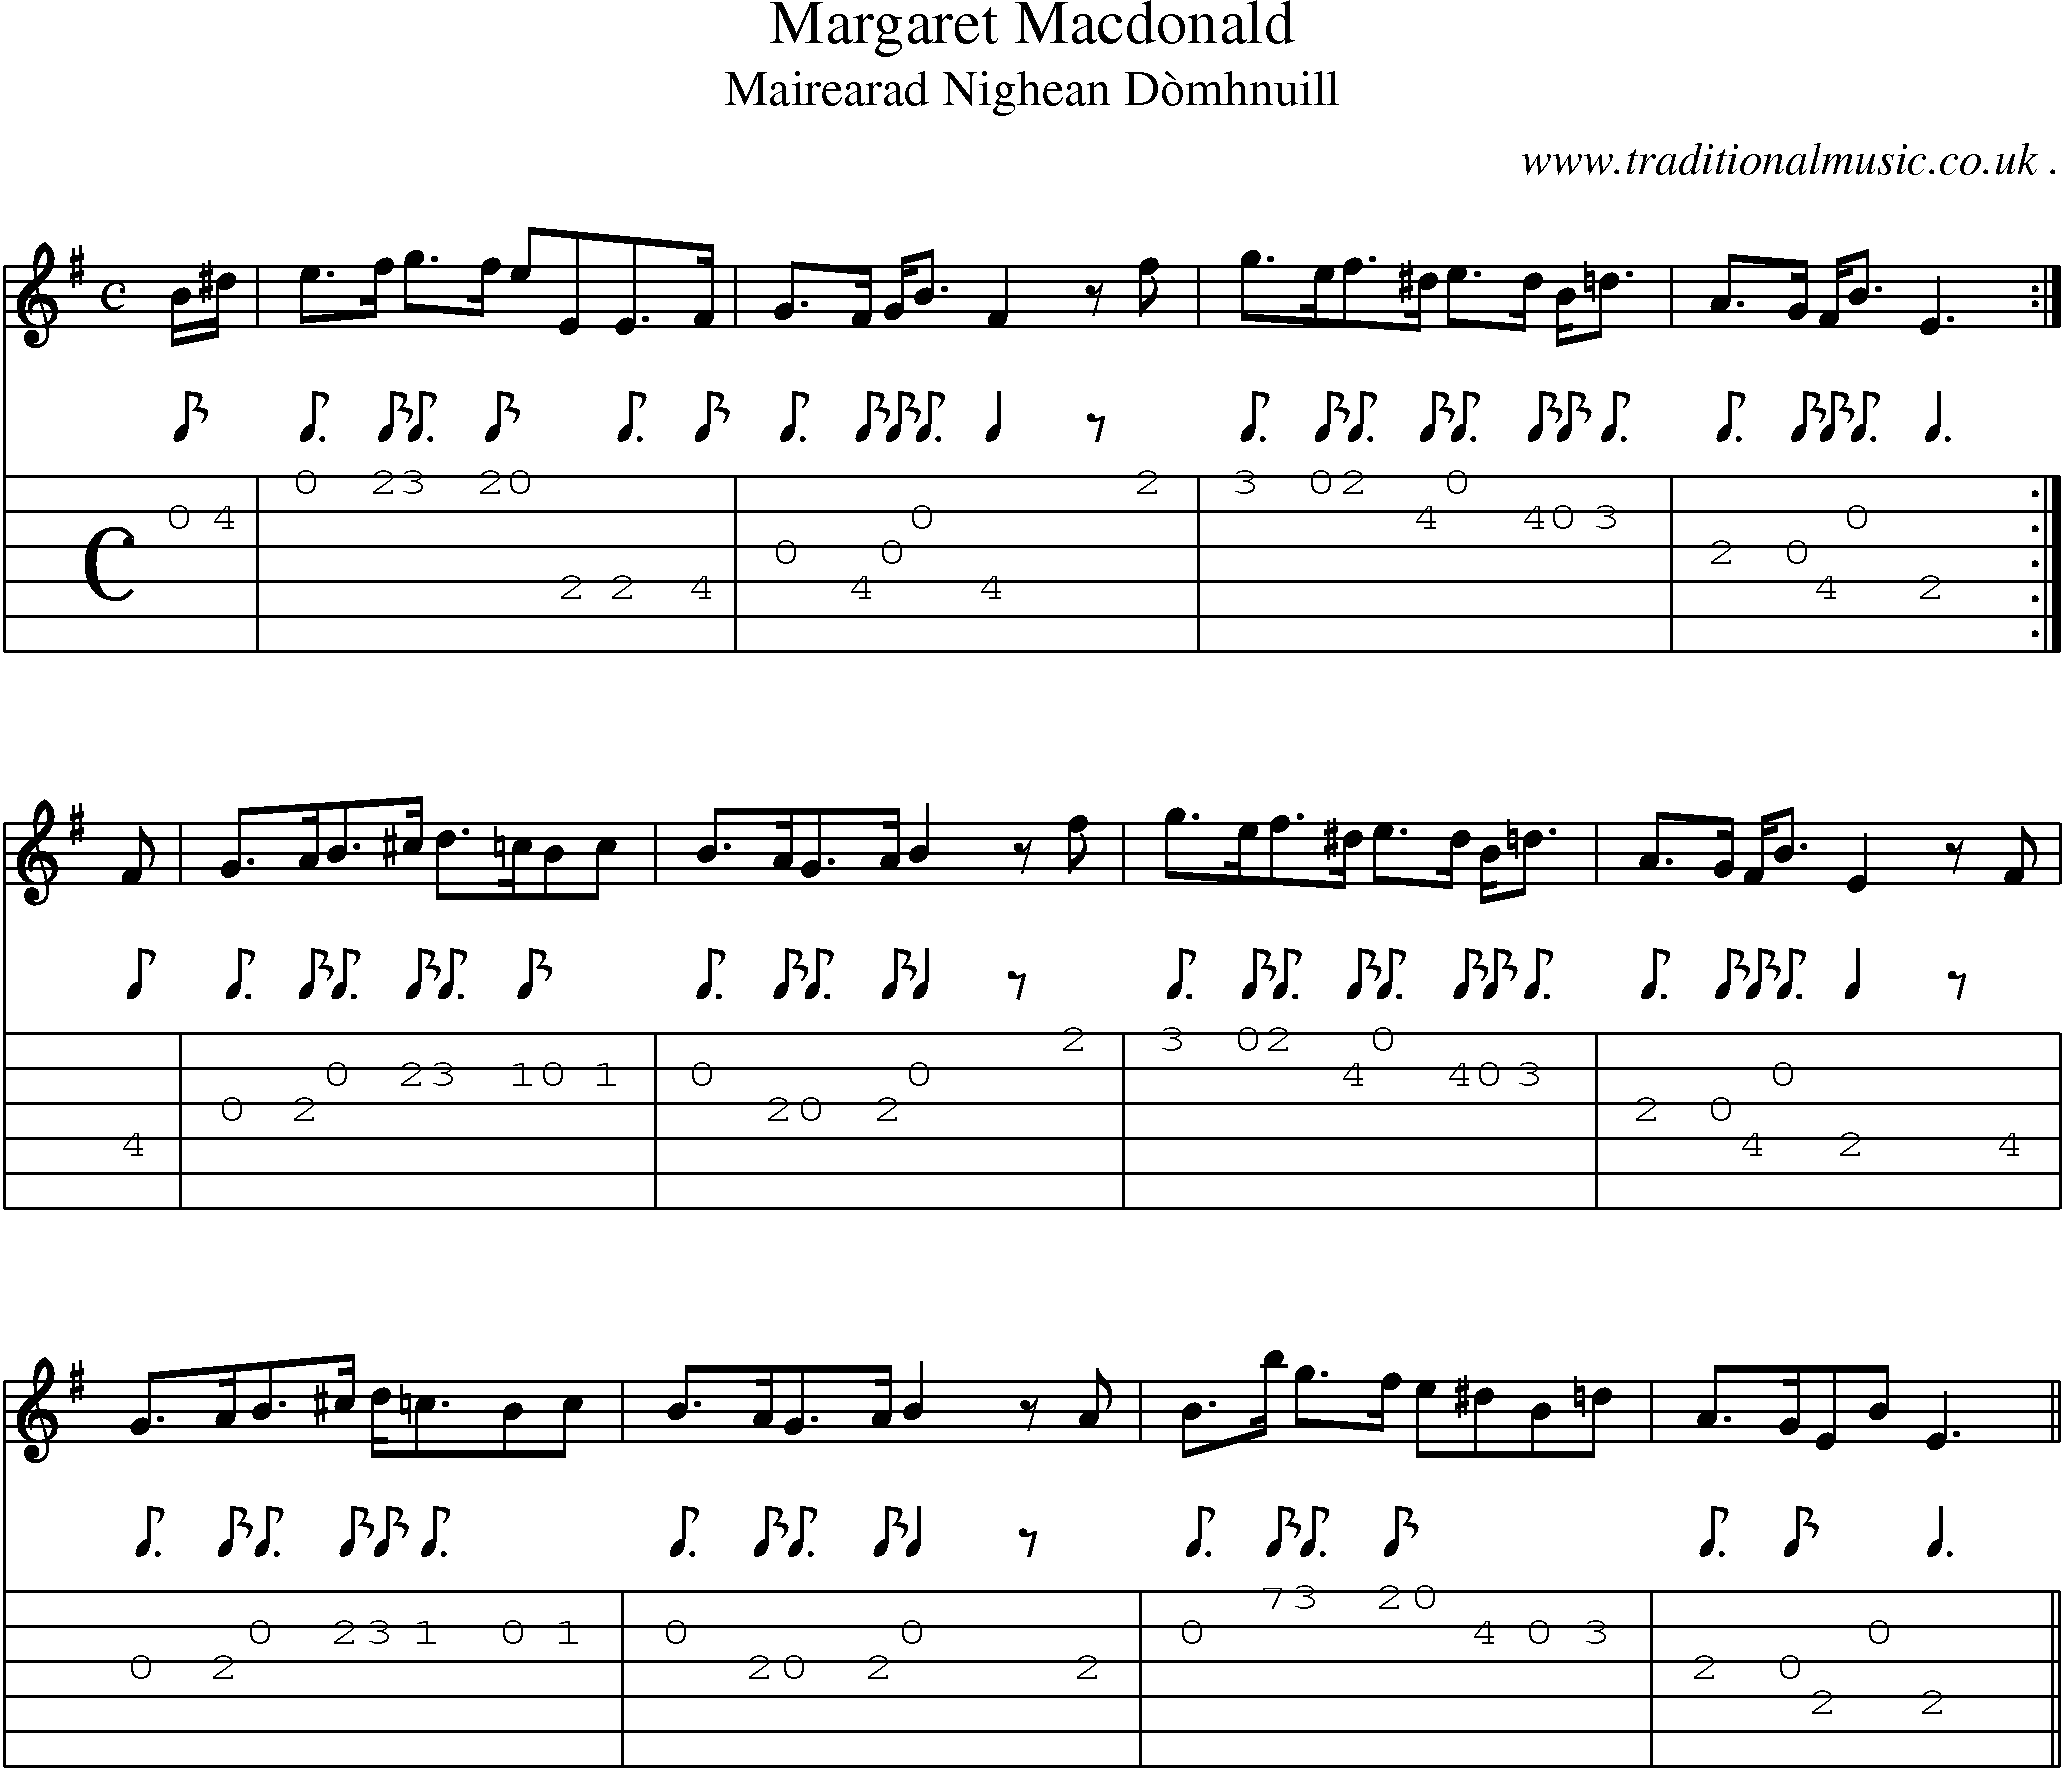 Sheet-music  score, Chords and Guitar Tabs for Margaret Macdonald